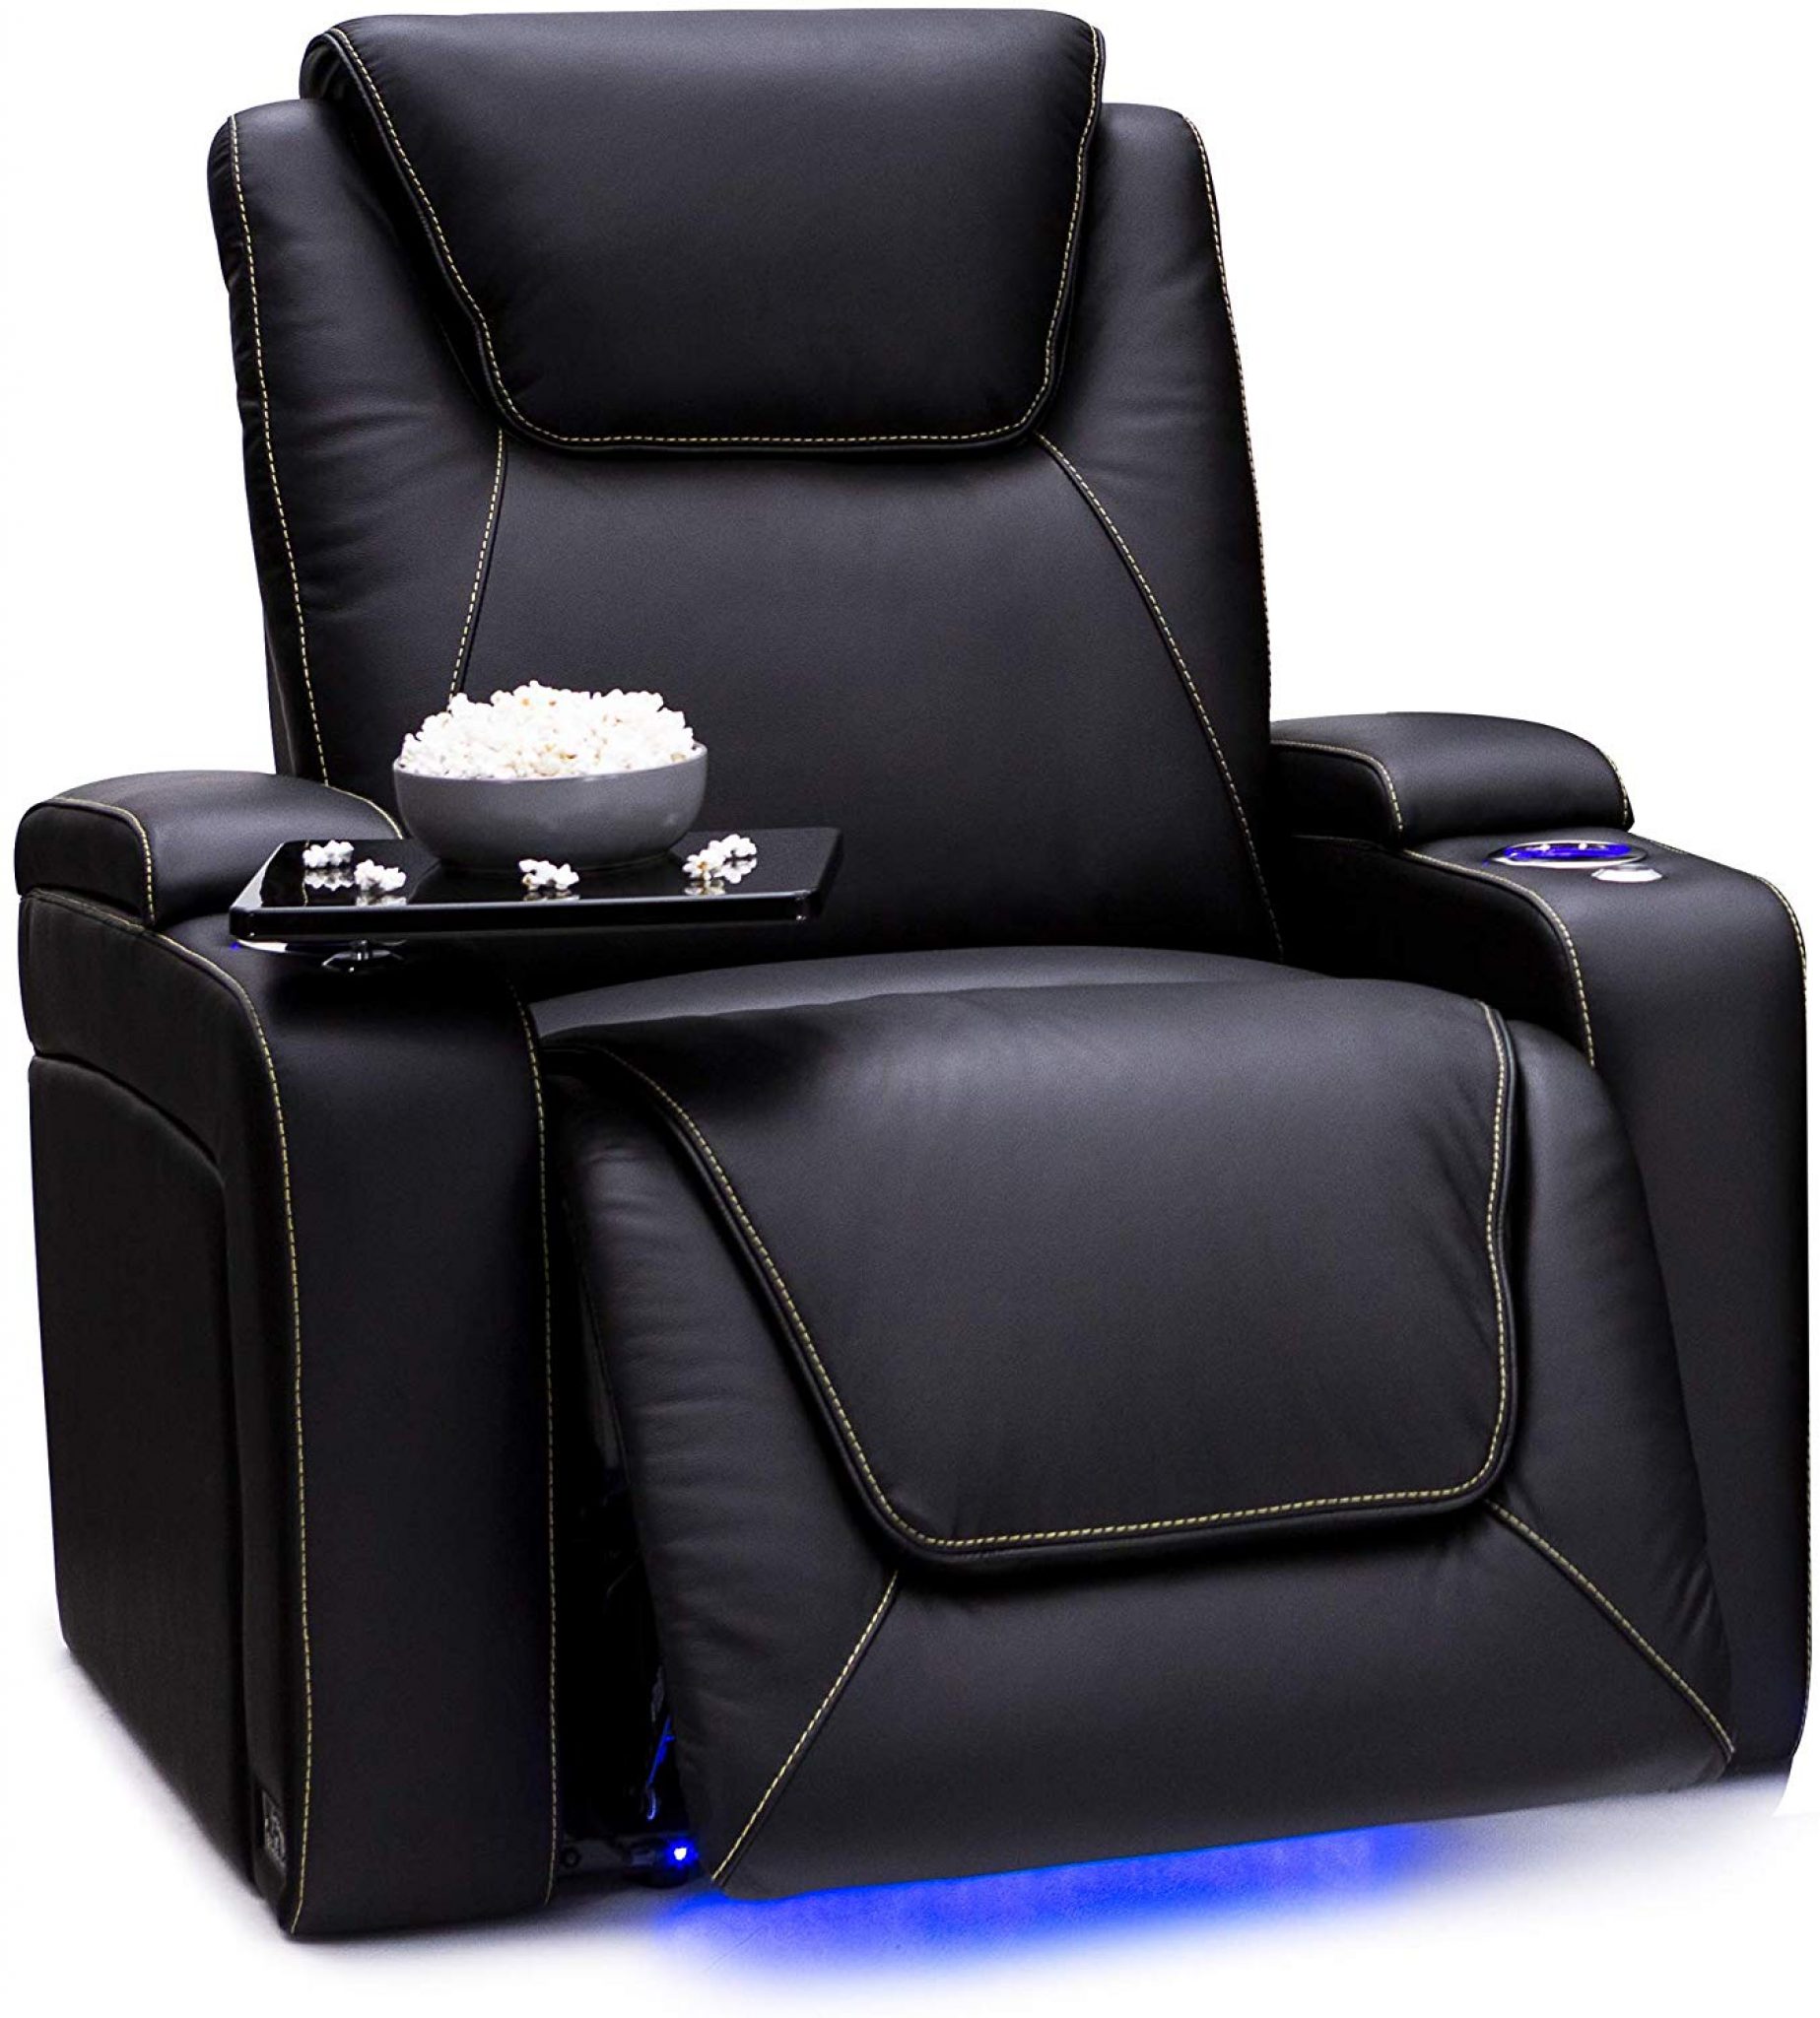 Top 10 Power Recliner Chairs with Cup Holder and USB